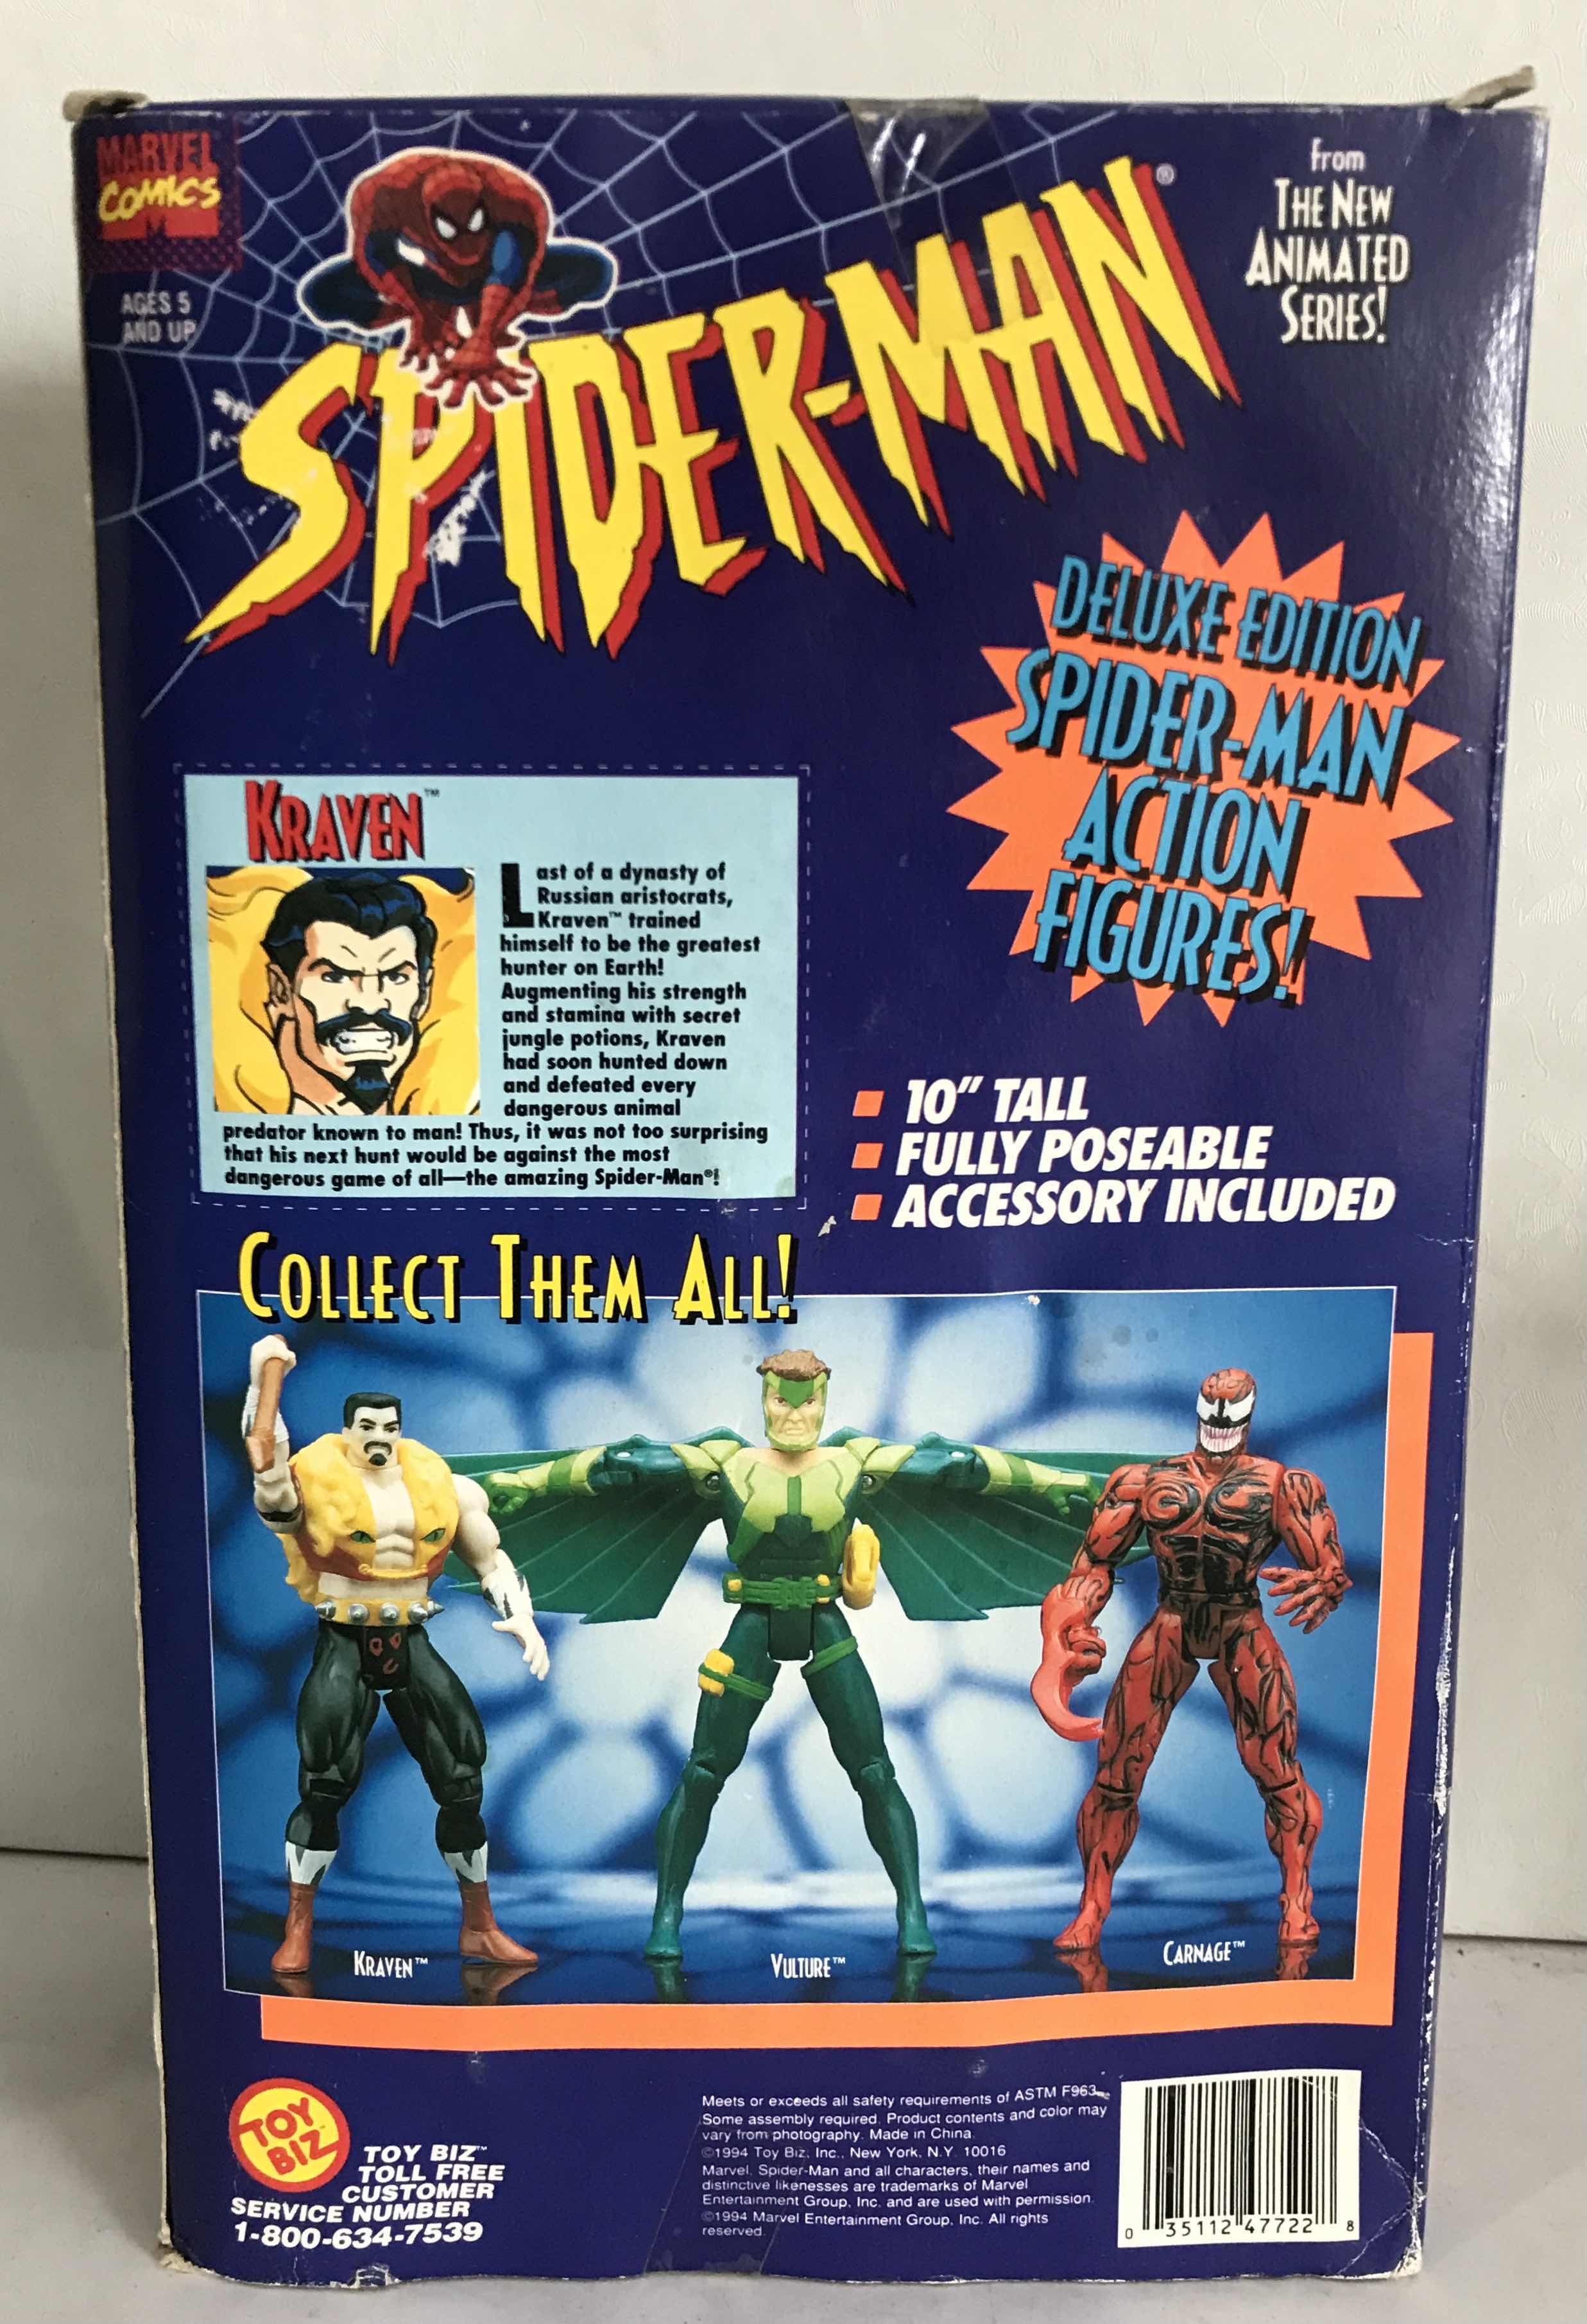 Photo 2 of NIB SPIDER MAN THE NEW ANIMATED SERIES DELUXE EDITION  “ KRAVEN” - RETAIL PRICE $49.00